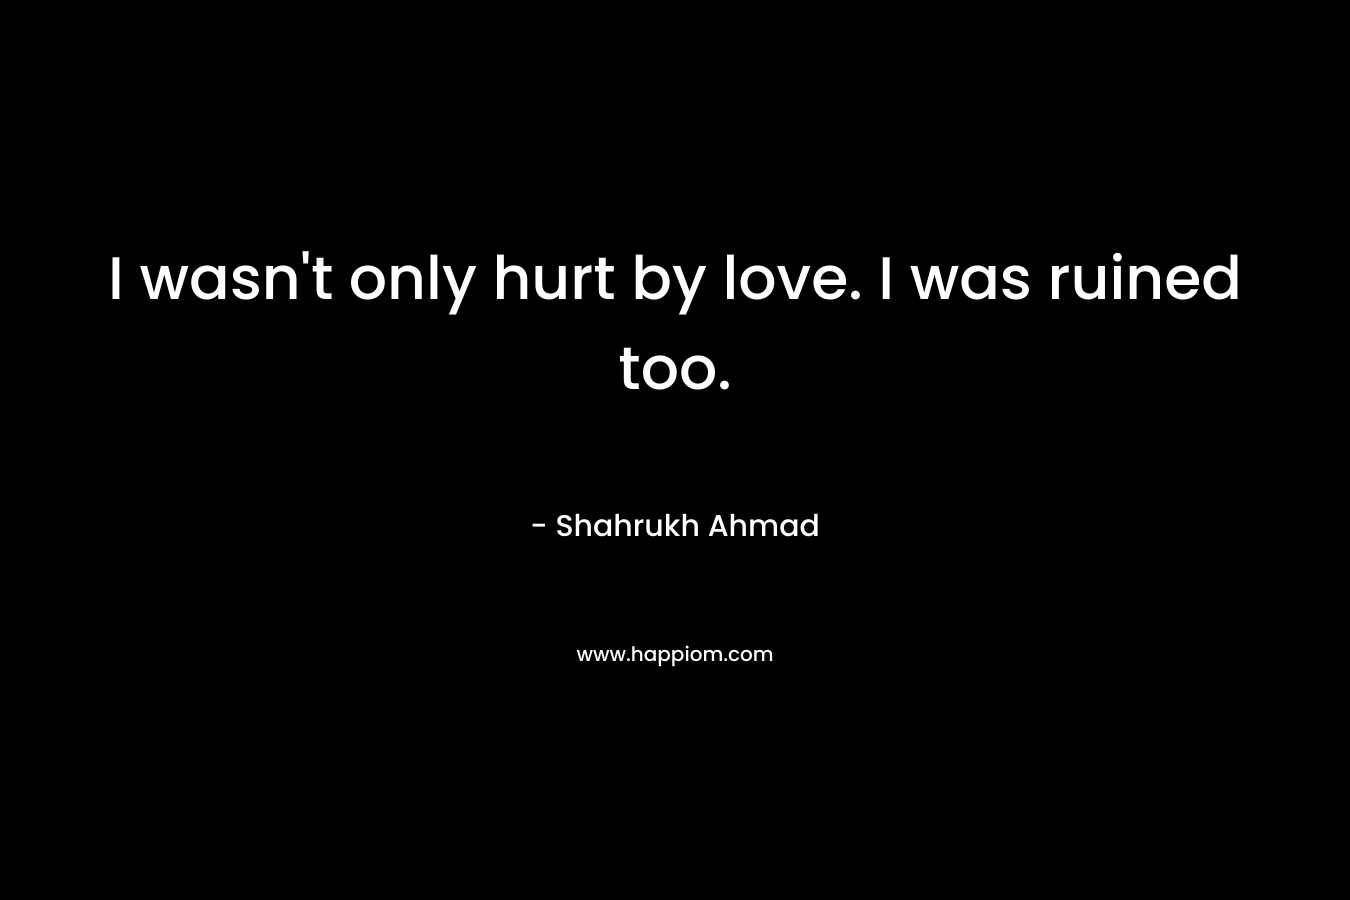 I wasn’t only hurt by love. I was ruined too. – Shahrukh Ahmad